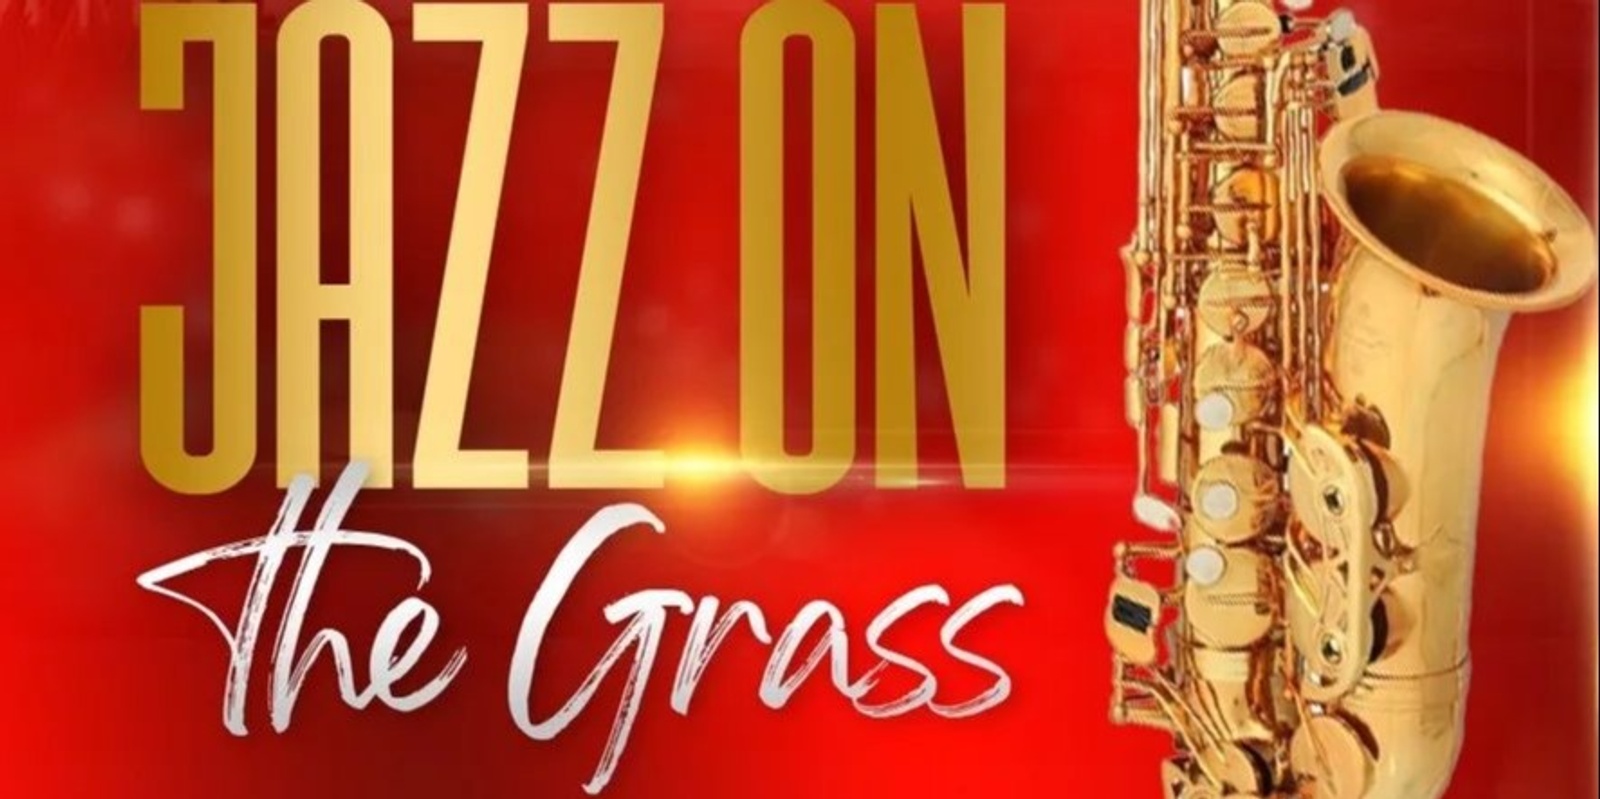 Banner image for 3rd Annual Jazz on the Grass - A Celebration of an Iconic Genre of Music!